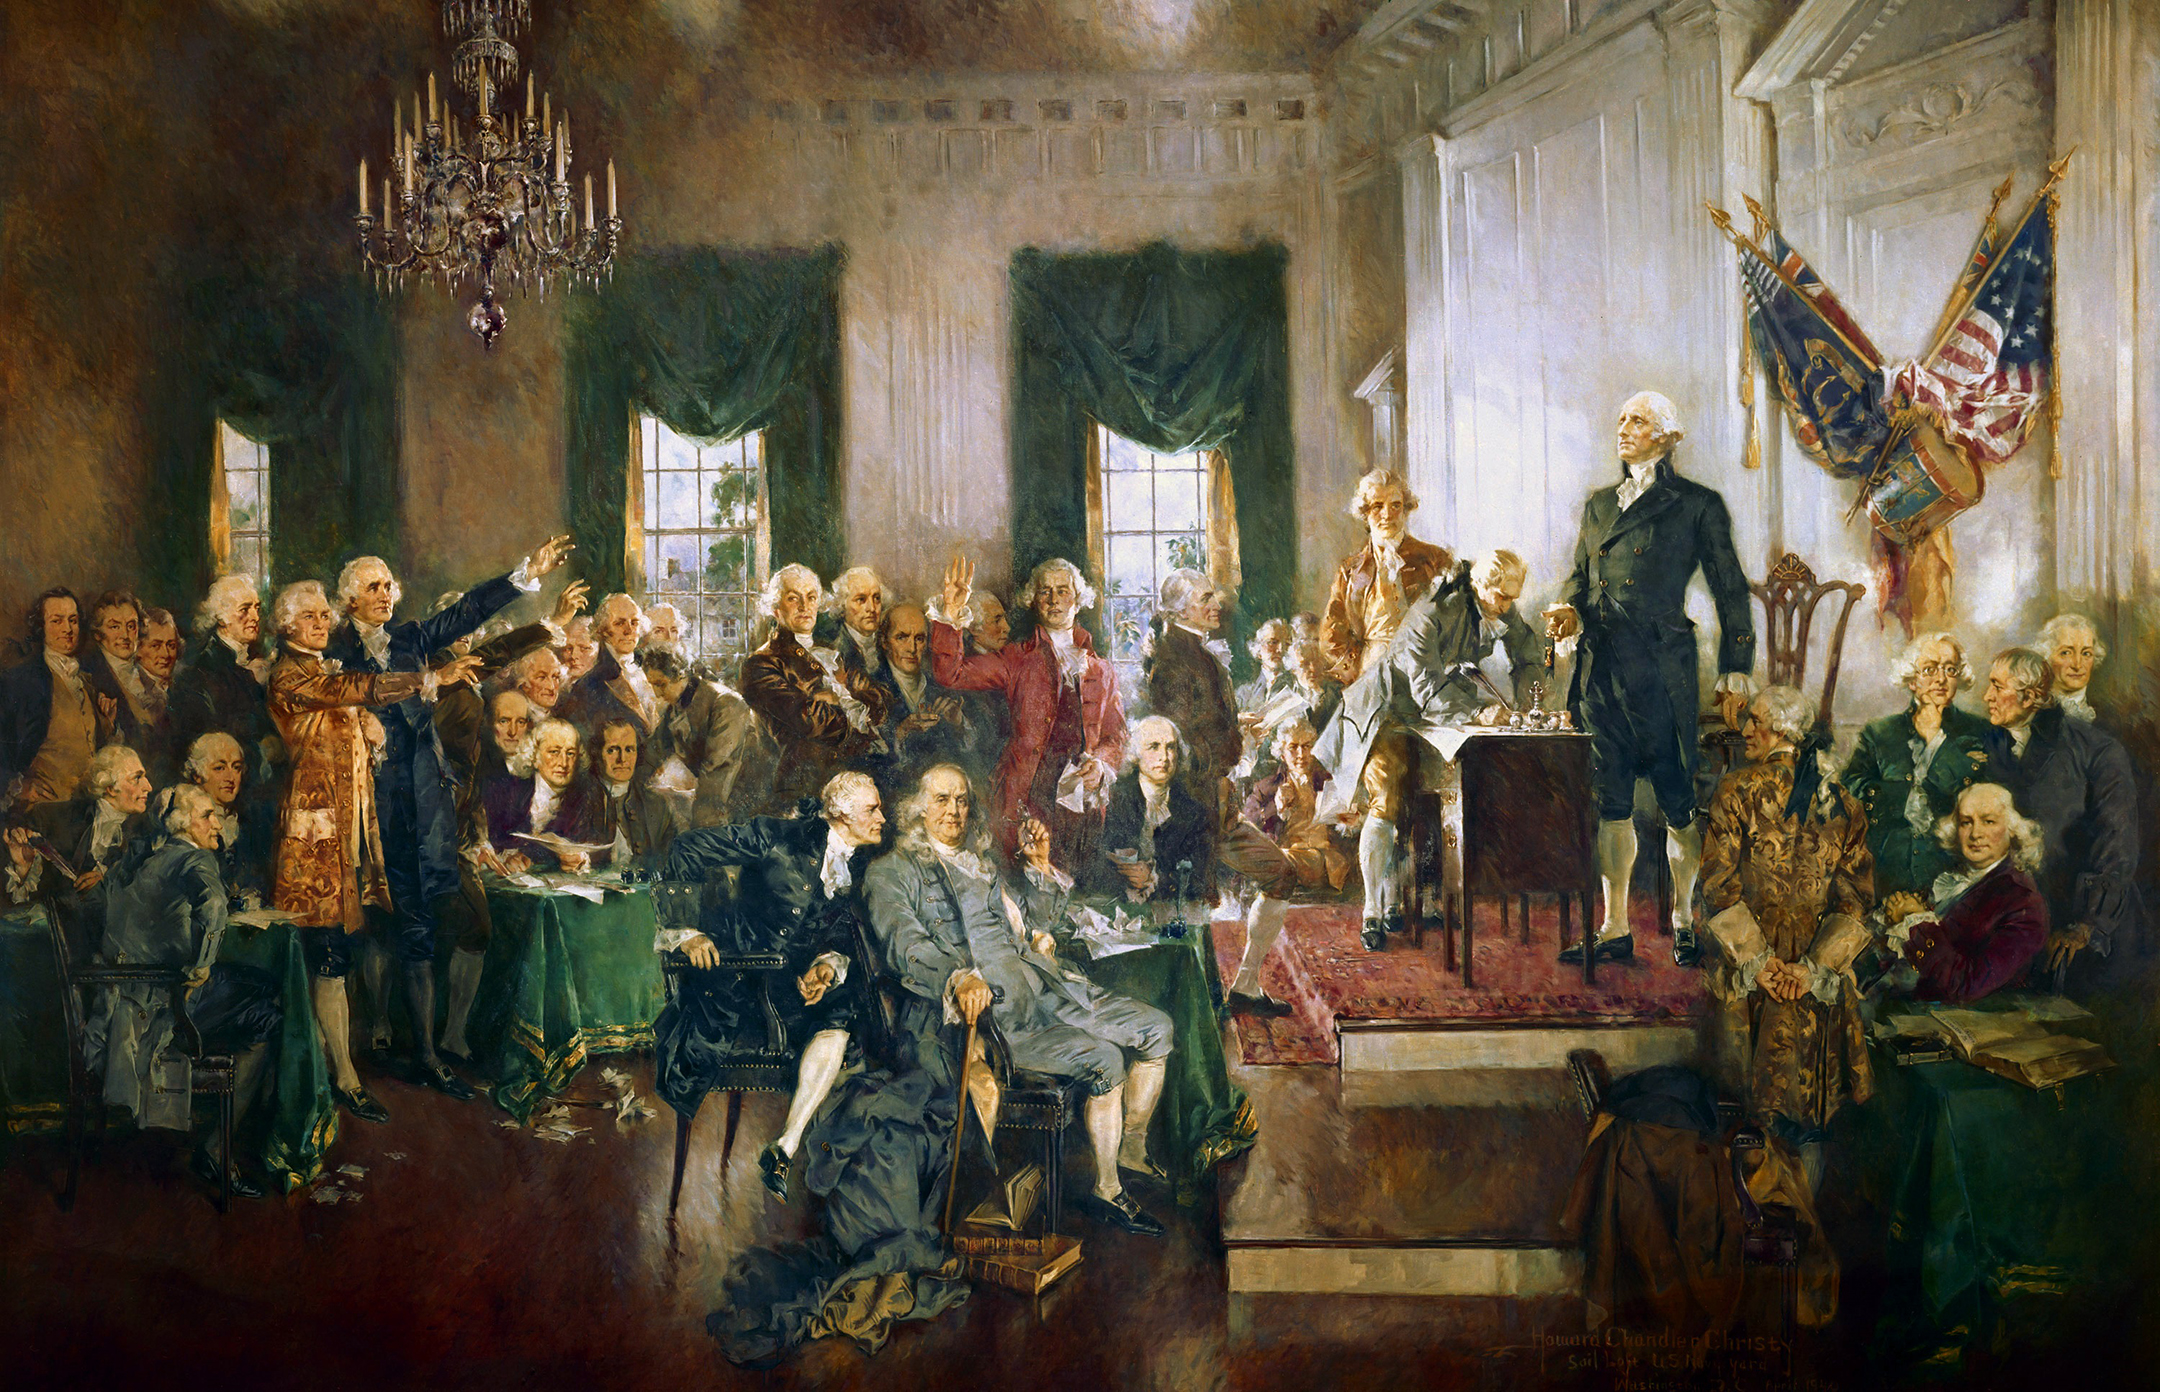 the painting scene at the signing of the constitution depicts Alexander Hamilton, Benjamin Franklin and James Madison